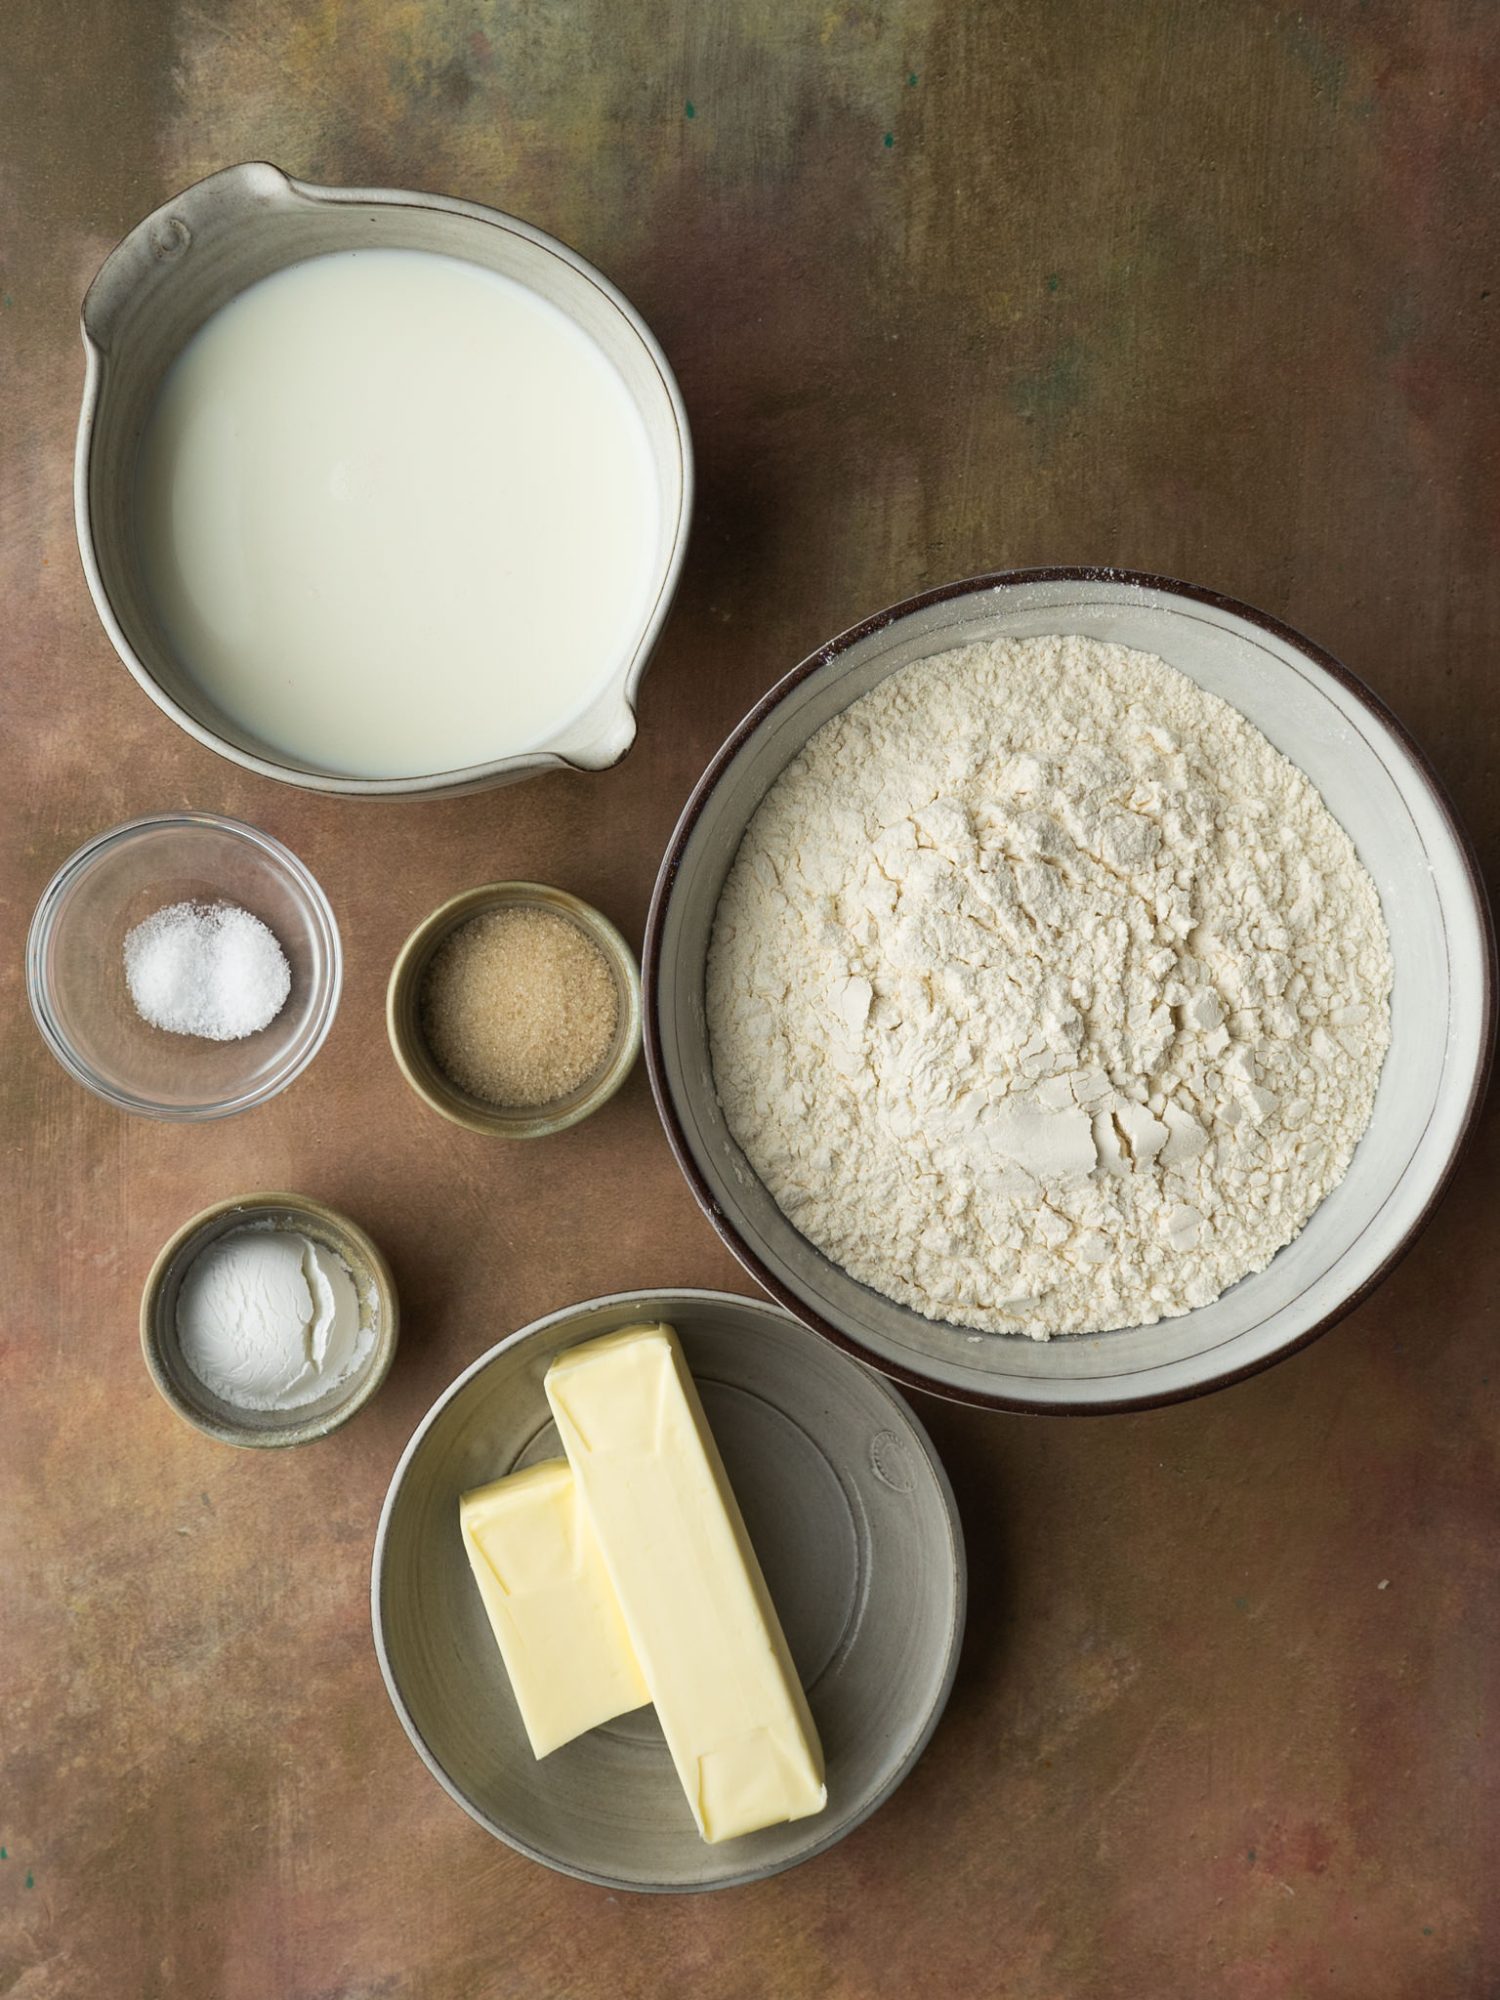 Ingredients for making butter biscuits in a cast iron skillet